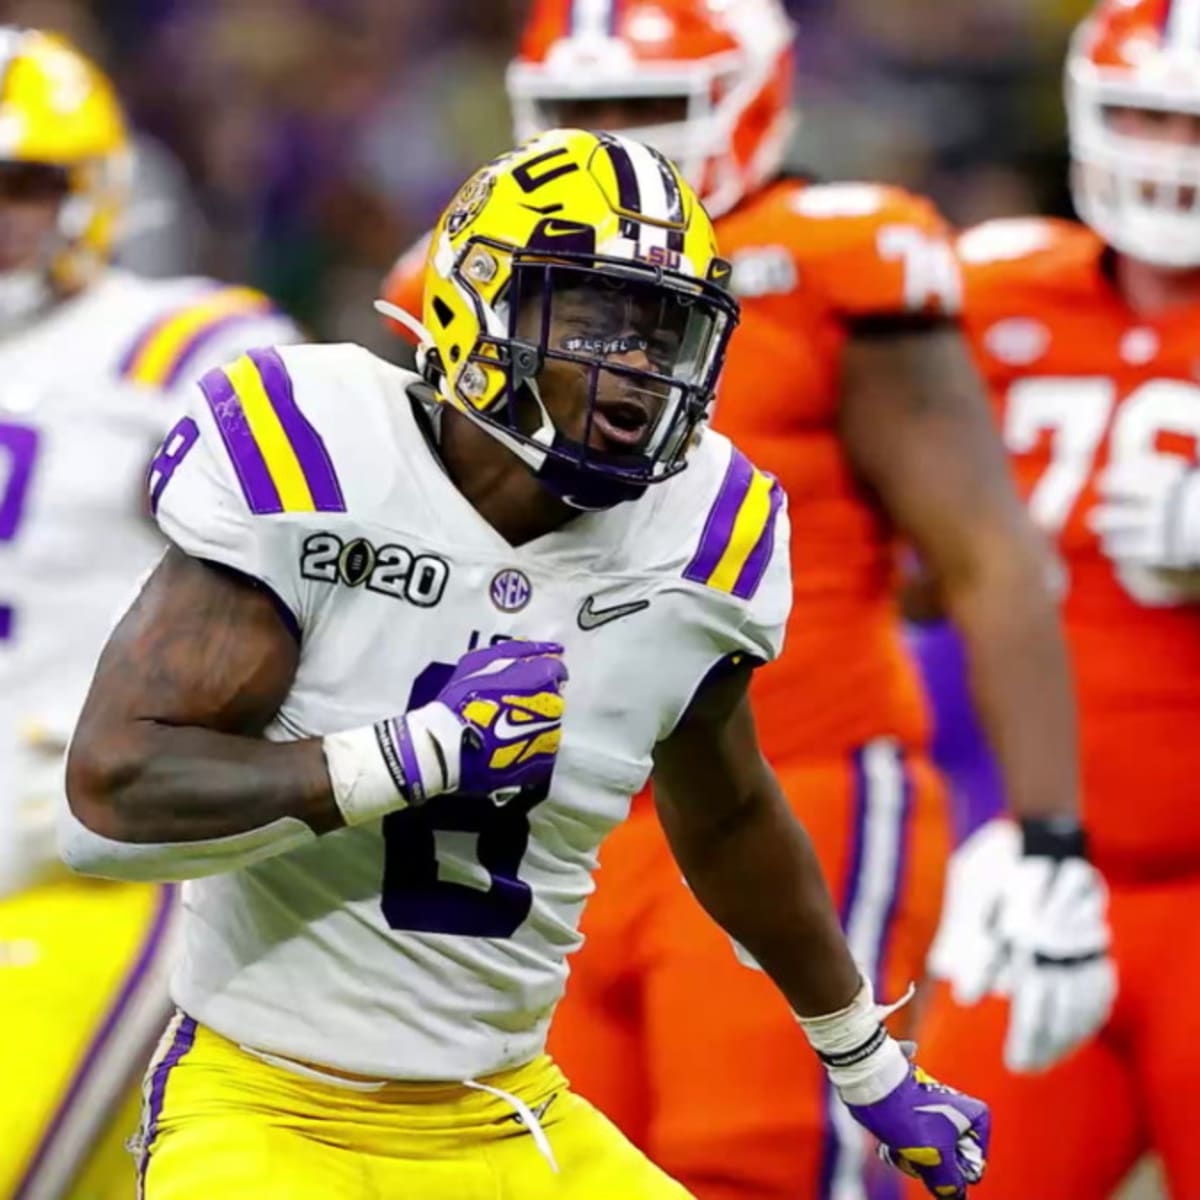 2020 LSU Football NFL Draft Profiles: Patrick Queen - And The